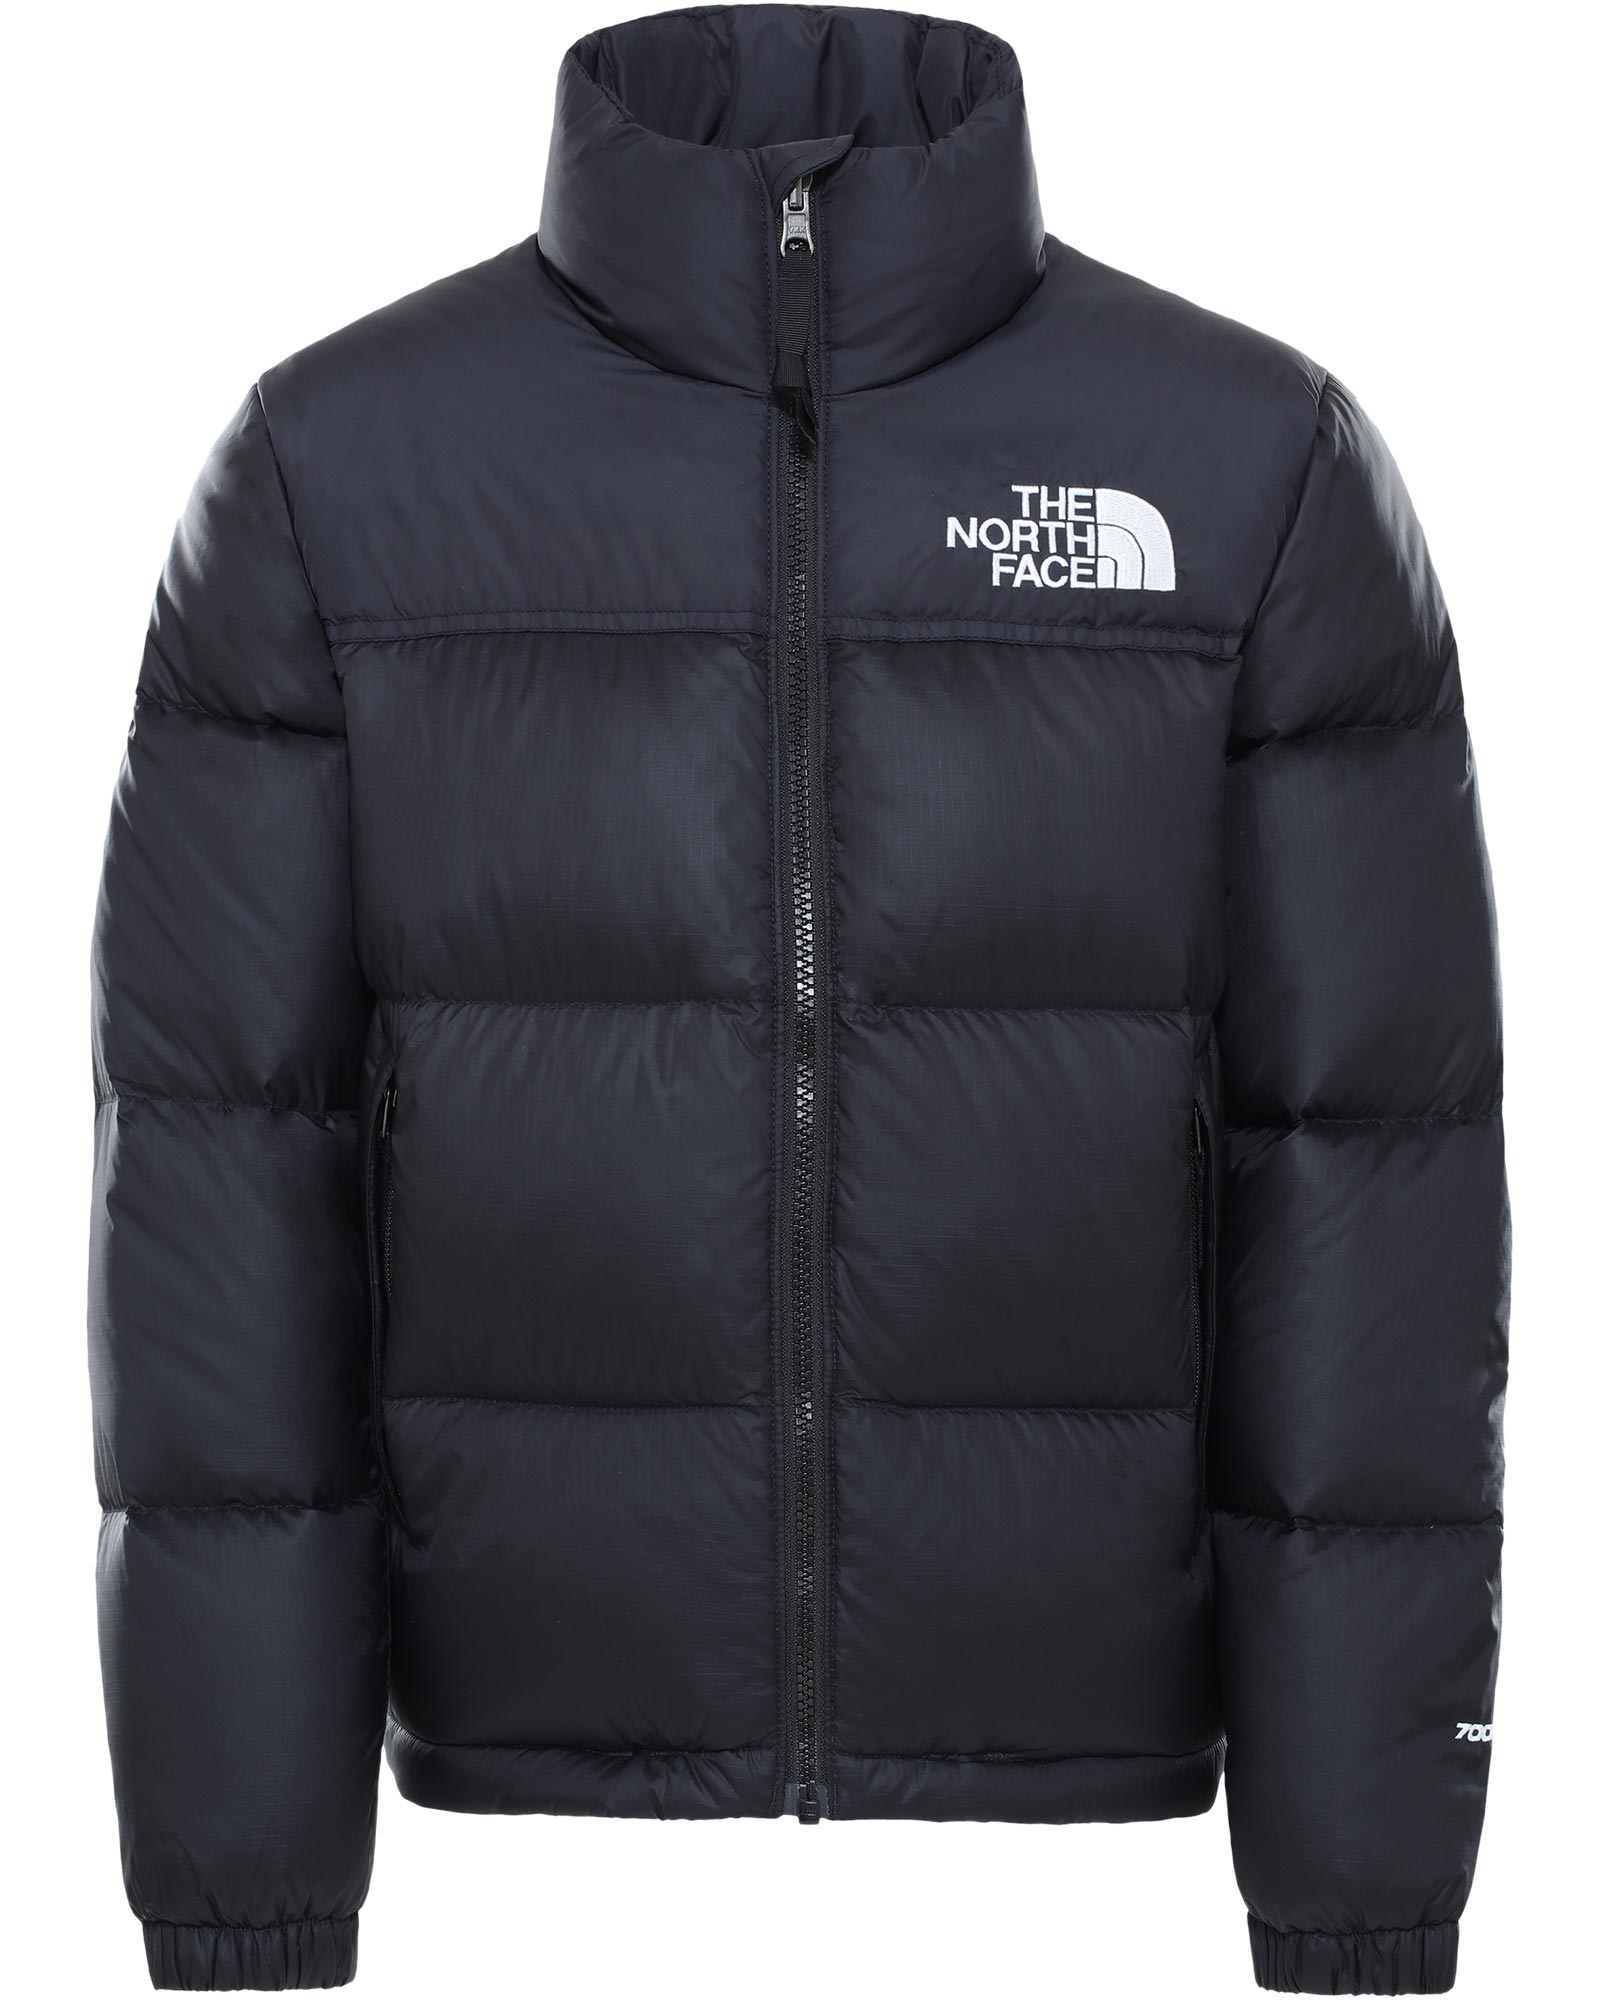 all black north face puffer jacket